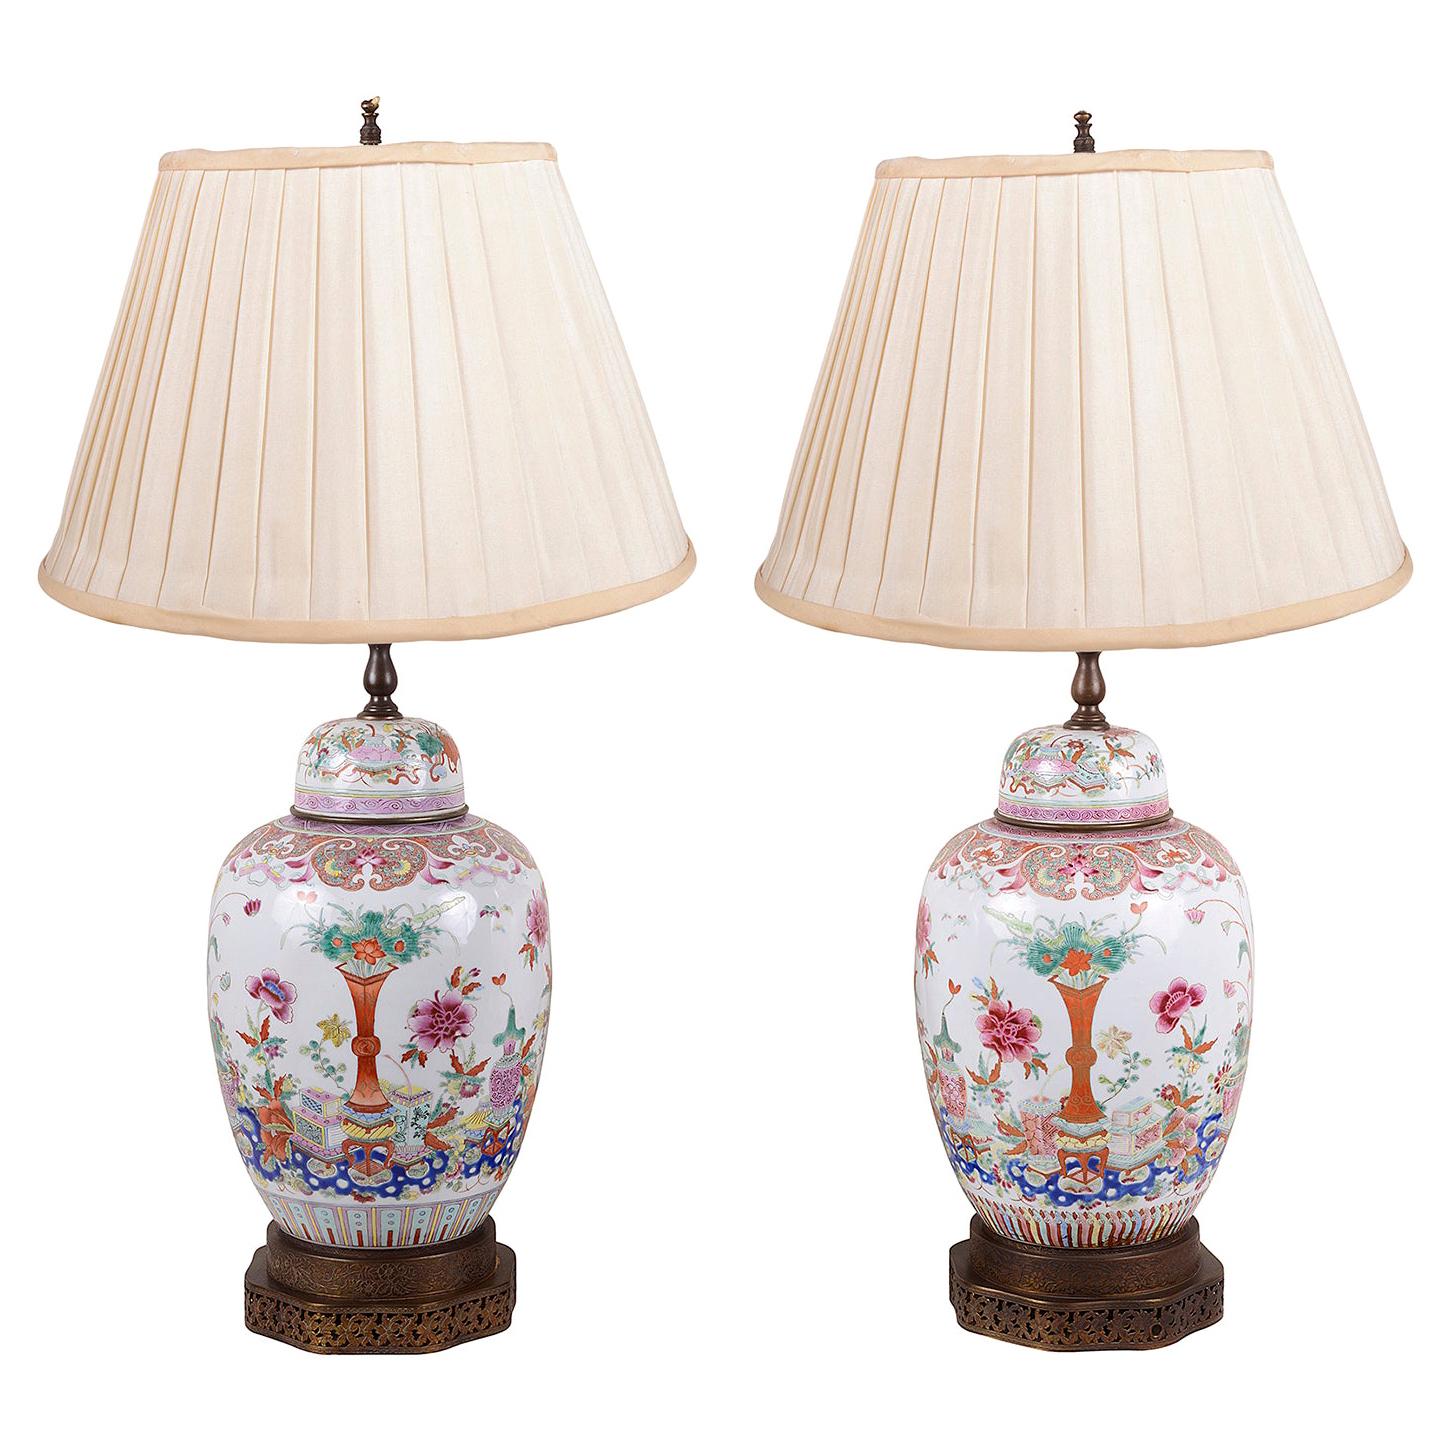 Pair of Chinese Famille Rose Ginger Jar Lamps, 19th Century